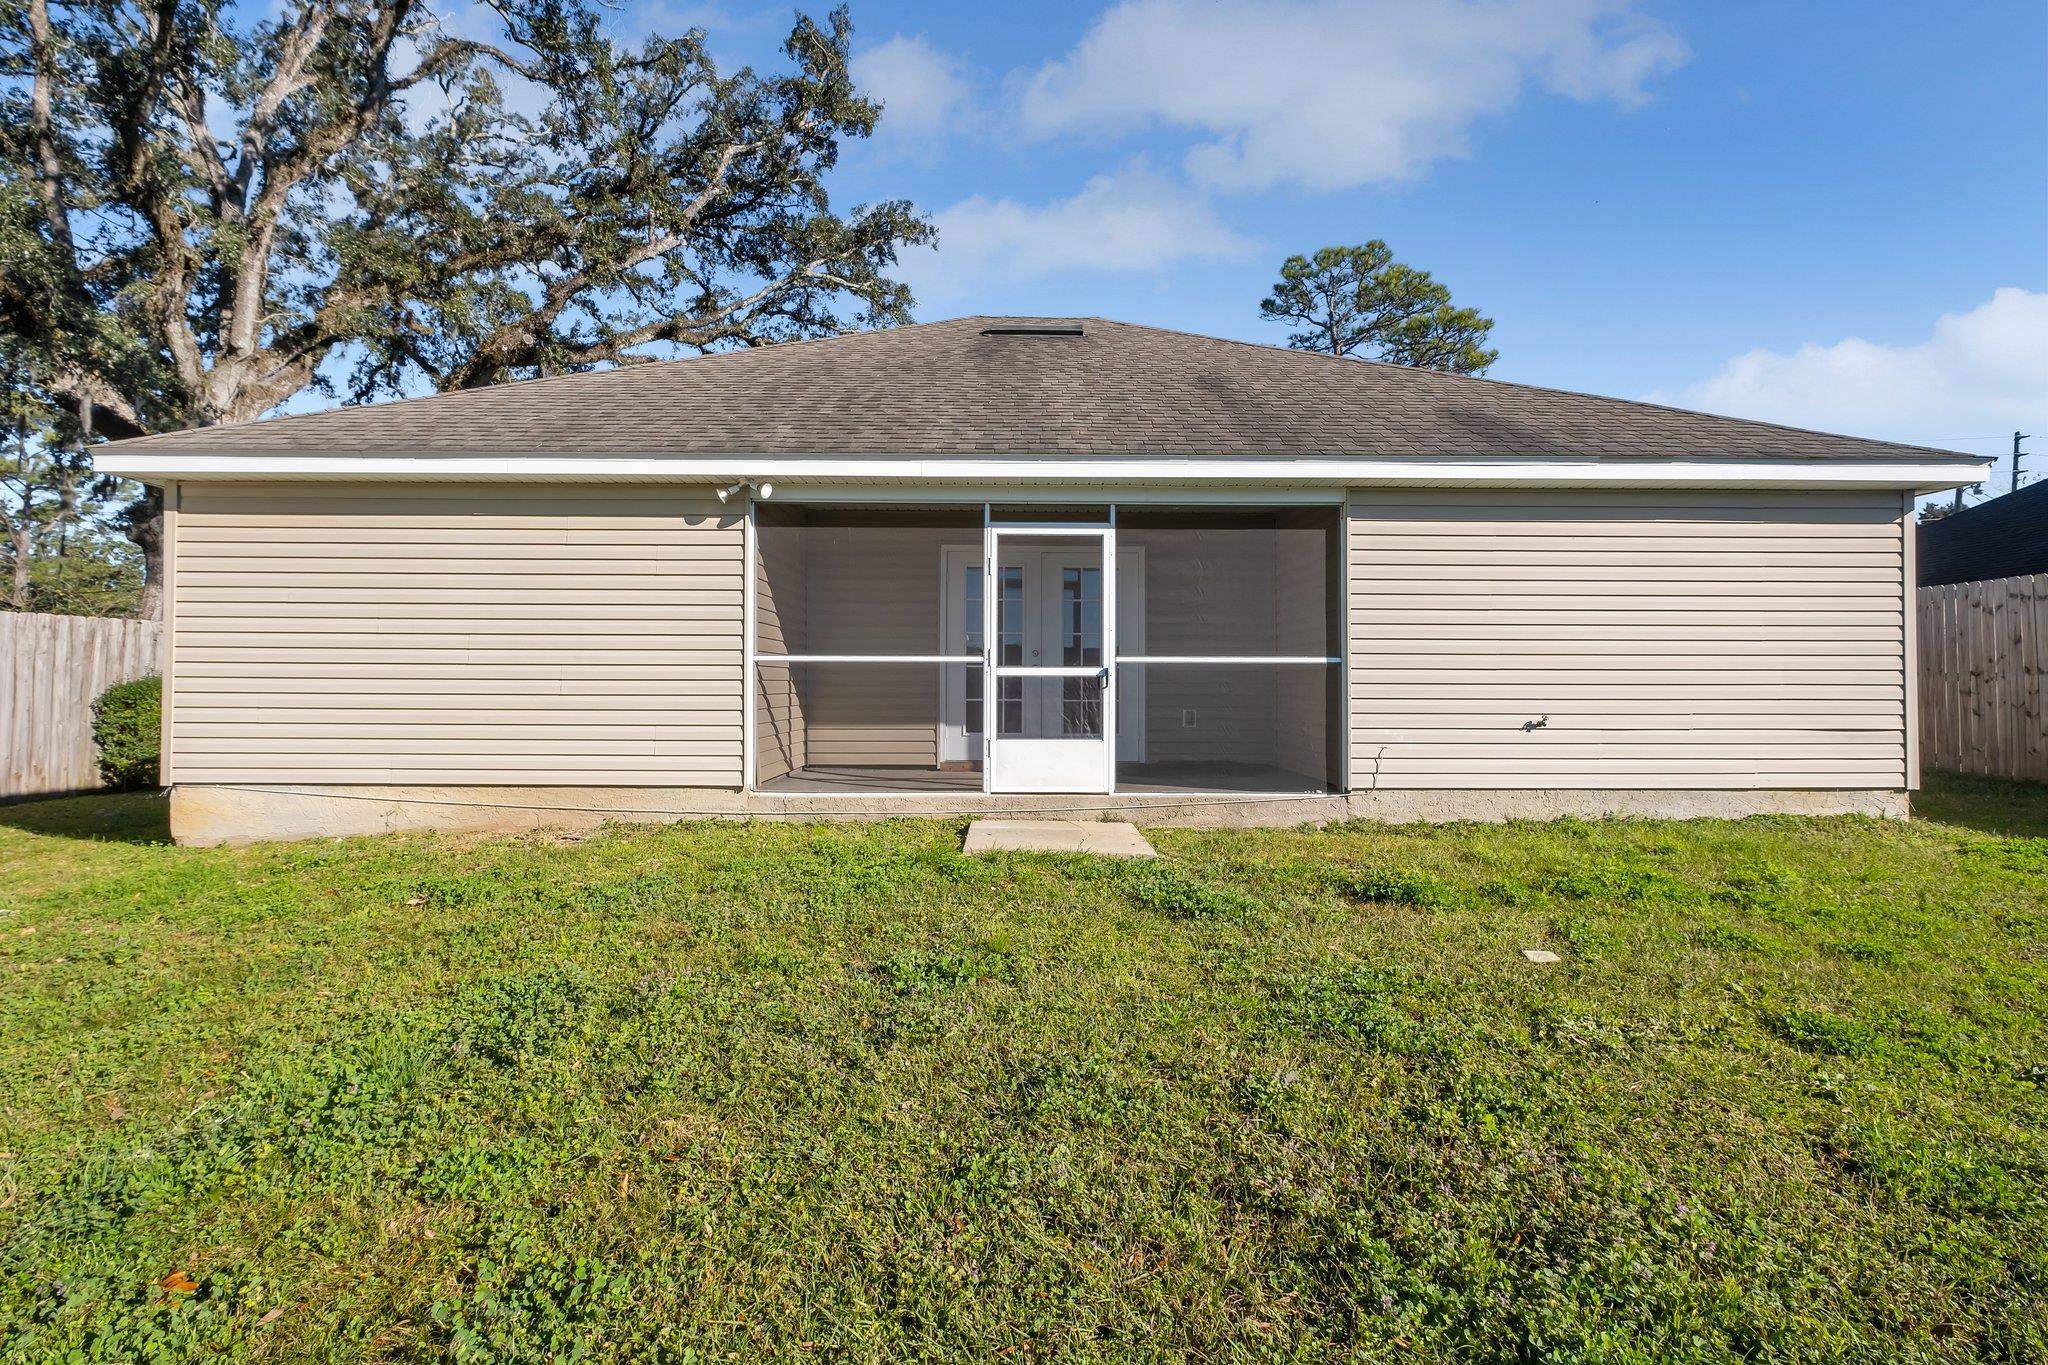 2635 Mission Road,TALLAHASSEE,Florida 32304,4 Bedrooms Bedrooms,3 BathroomsBathrooms,Detached single family,2635 Mission Road,368050